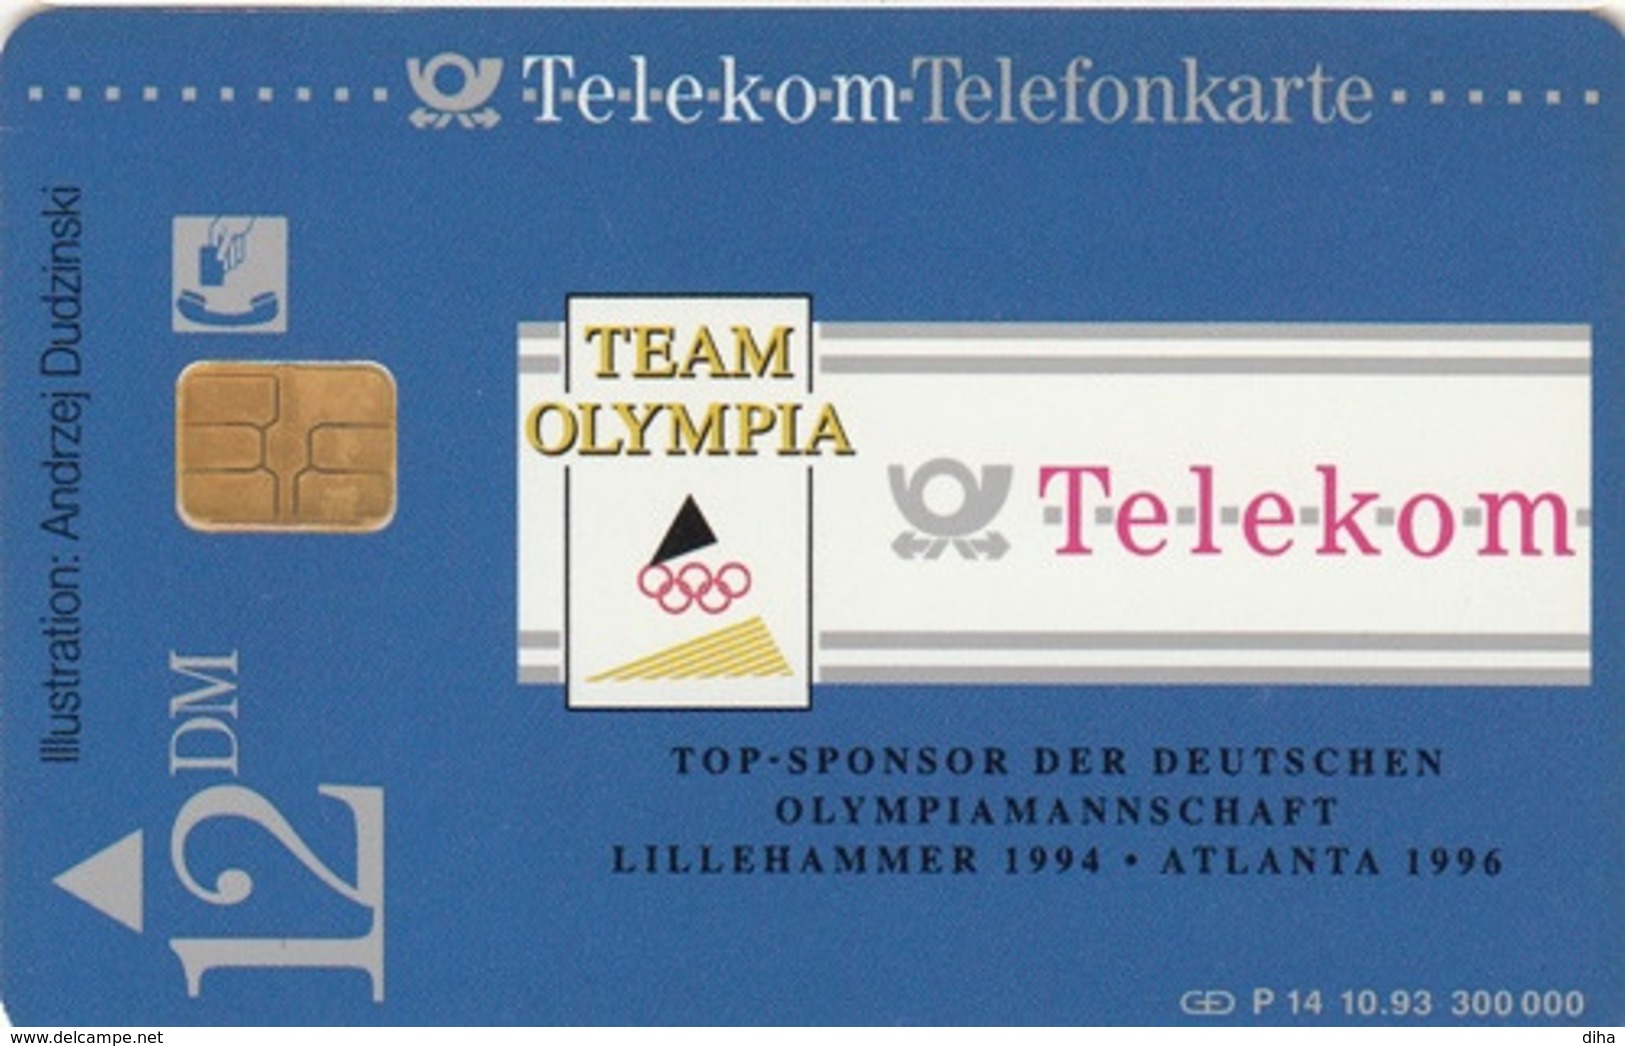 T324 - Germany, Phonecard, P 14, 10.93, Bob, 12 DM, Used, 2 Scans - Jeux Olympiques